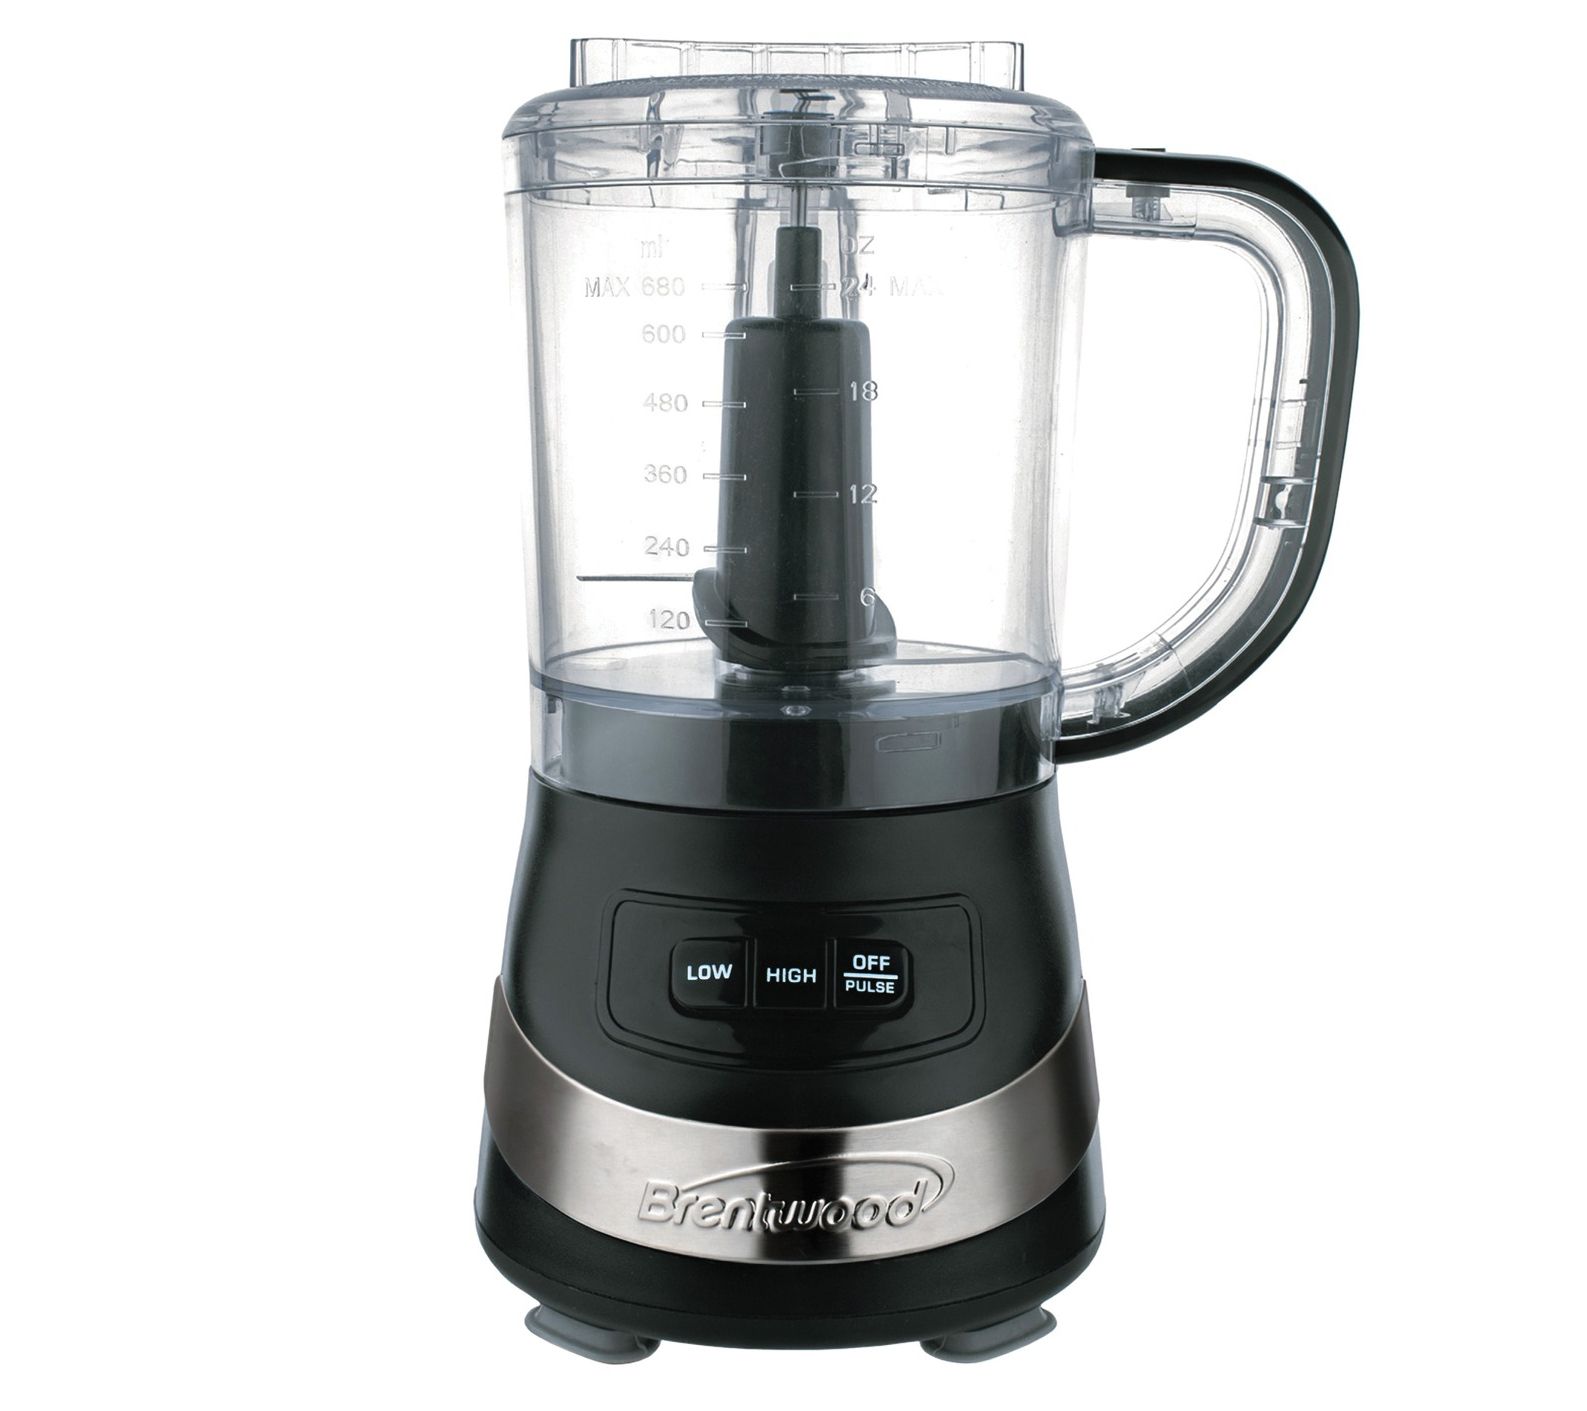 Black+Decker 3-in-1 Easy Assembly 8-Cup Food Processor 